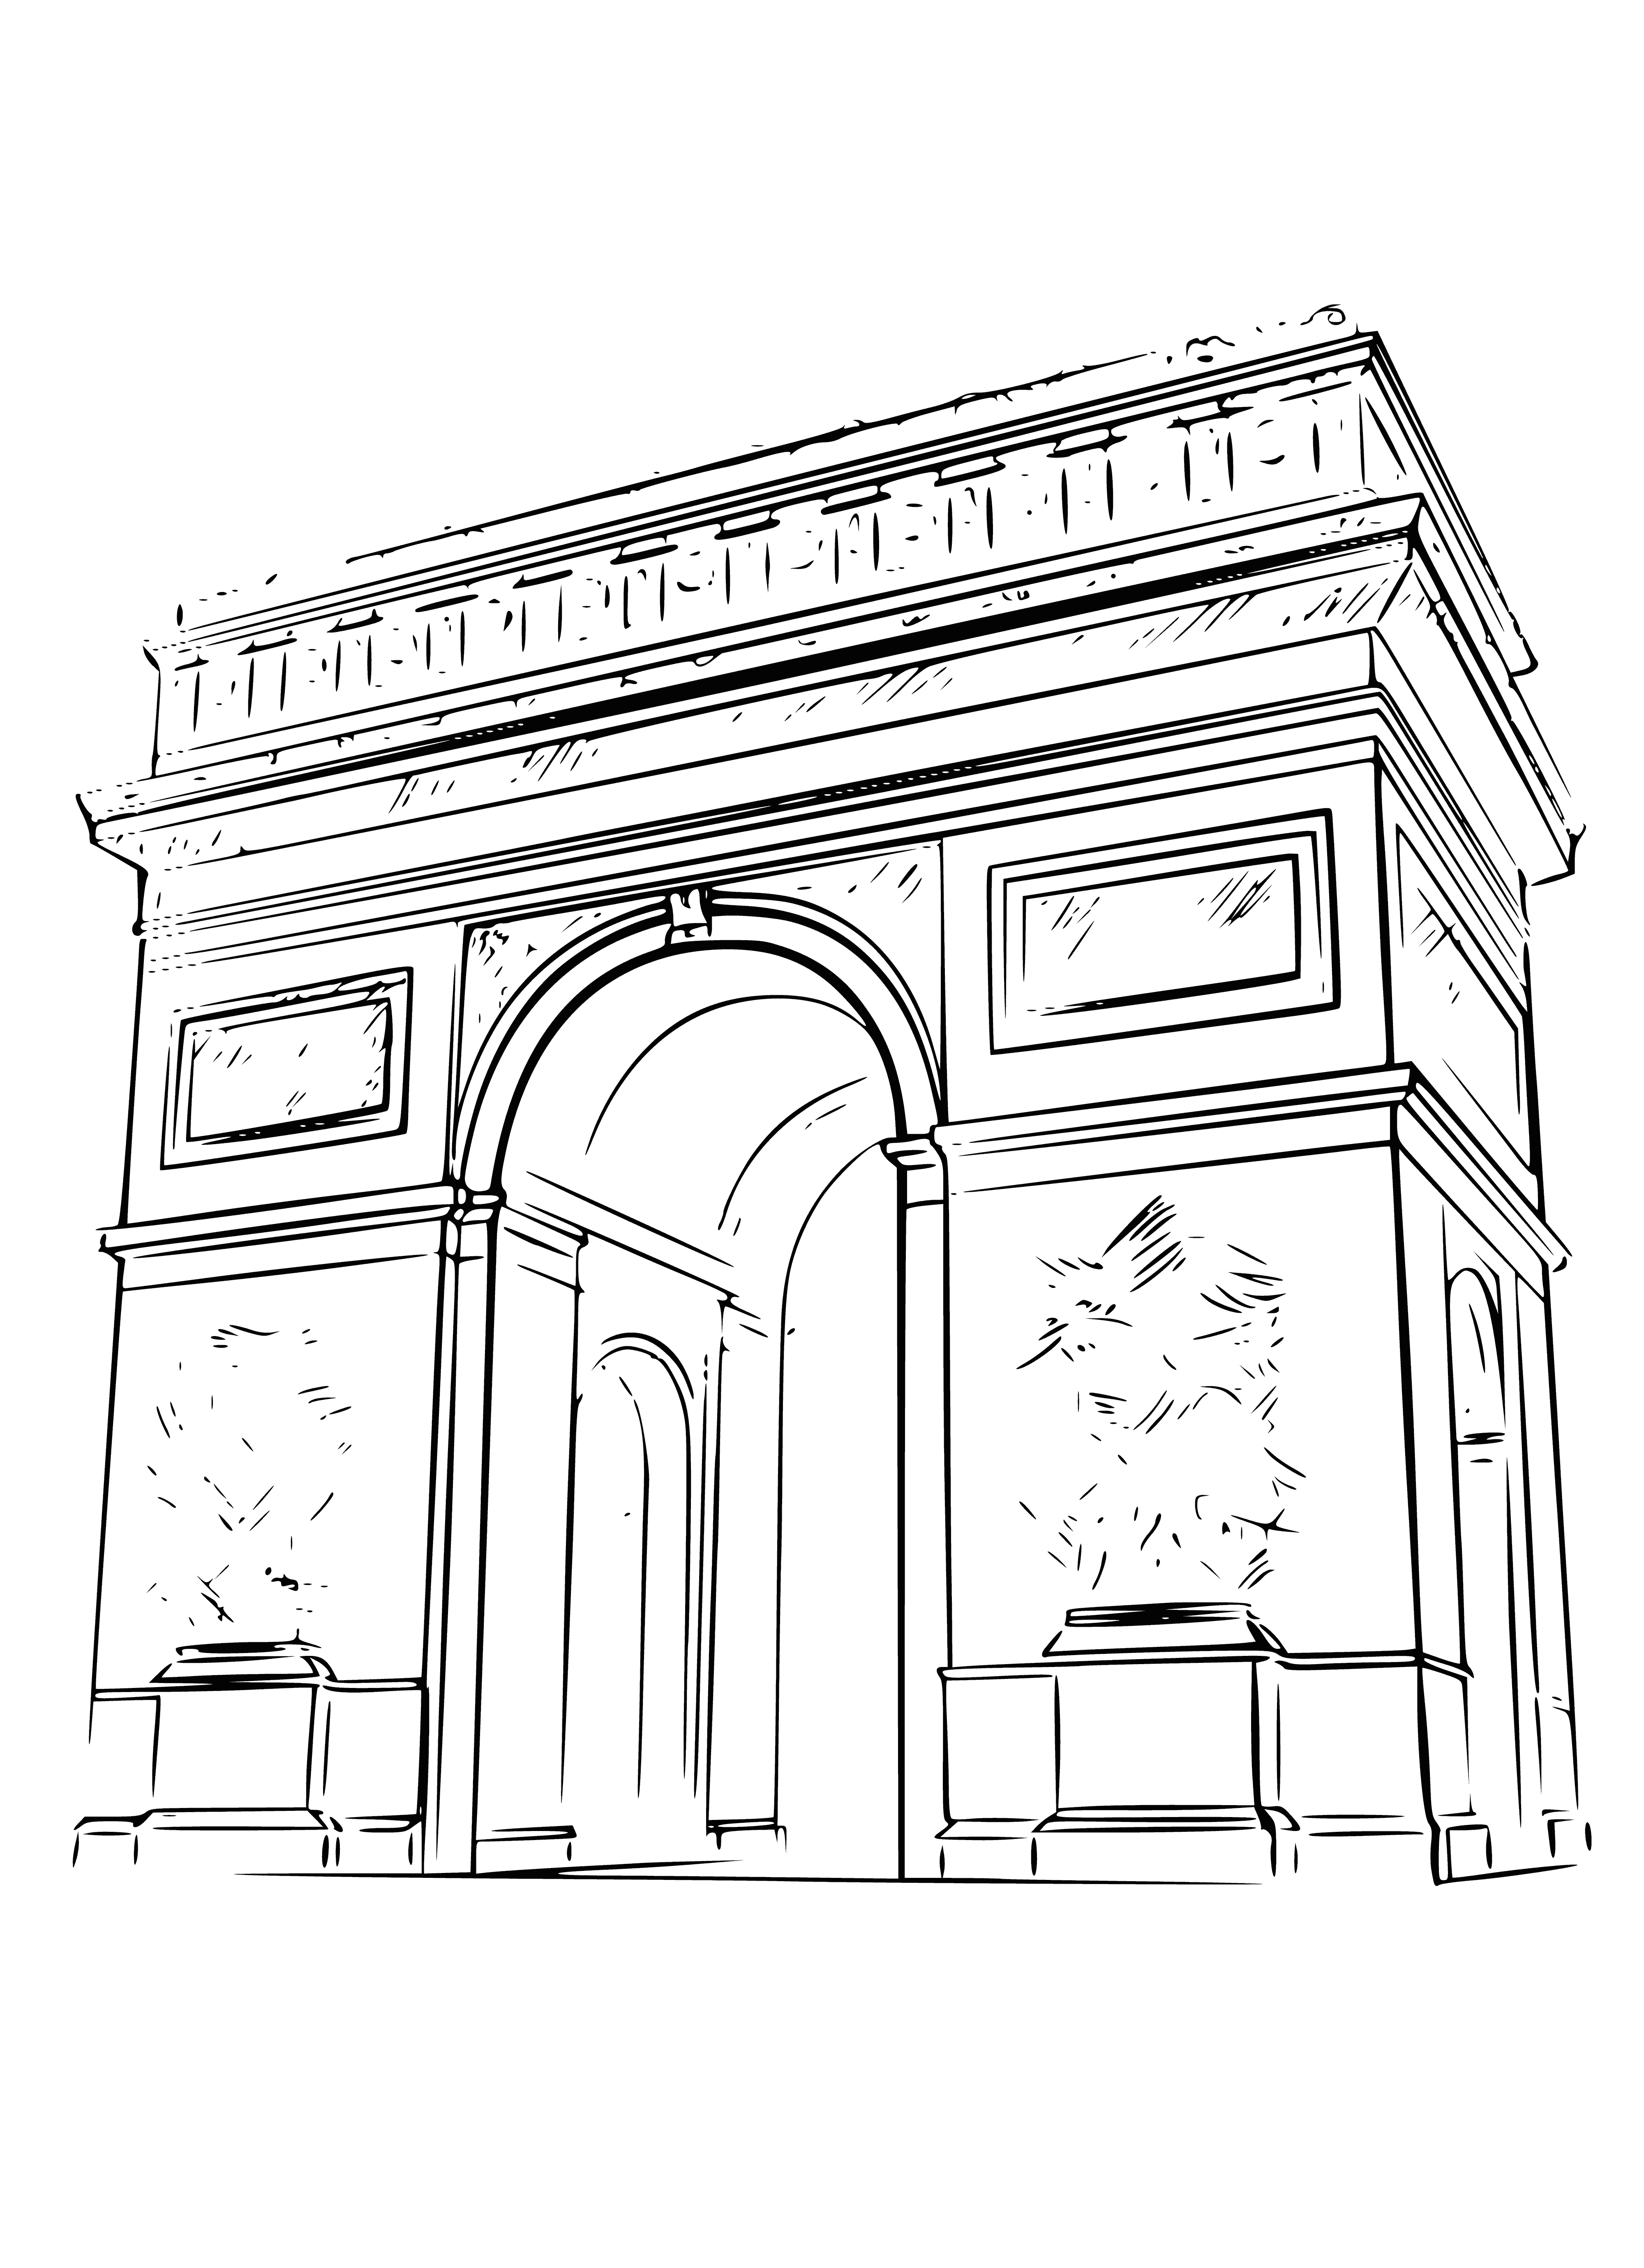 coloring page: The Arc de Triomphe in Paris, France is a 50m tall symbol of French history & culture, located in a busy traffic circle adornedwith intricate carvings & sculptures. It is a popular tourist destination & often coloring pagegraphed.